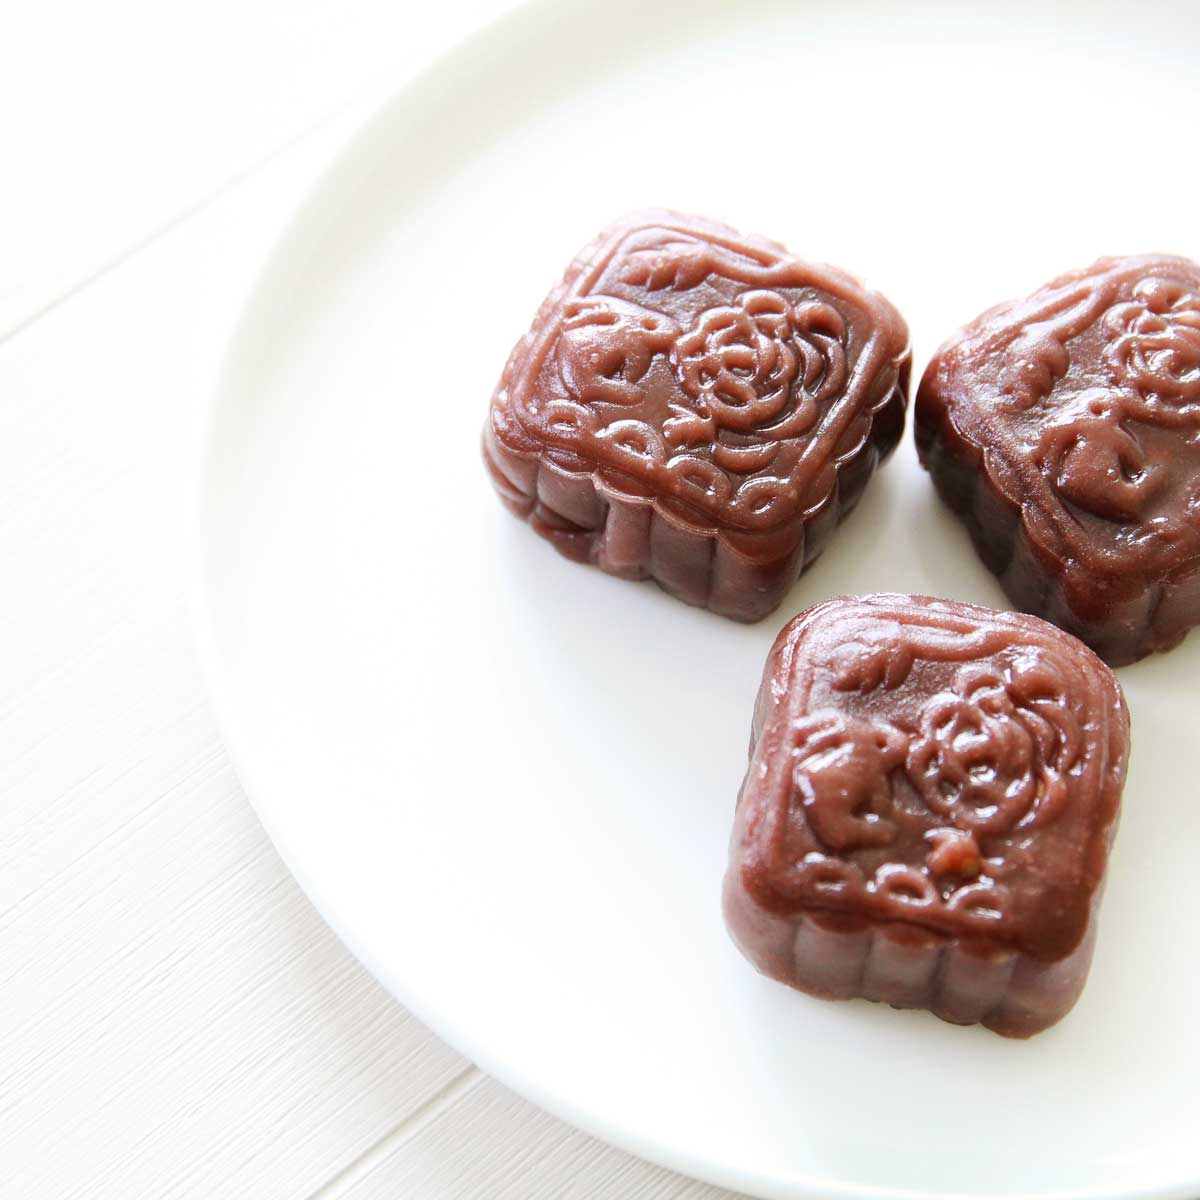 10 Minute Butterfly Pea Snowskin Mooncakes (No Steaming Required!) - snowskin mooncakes